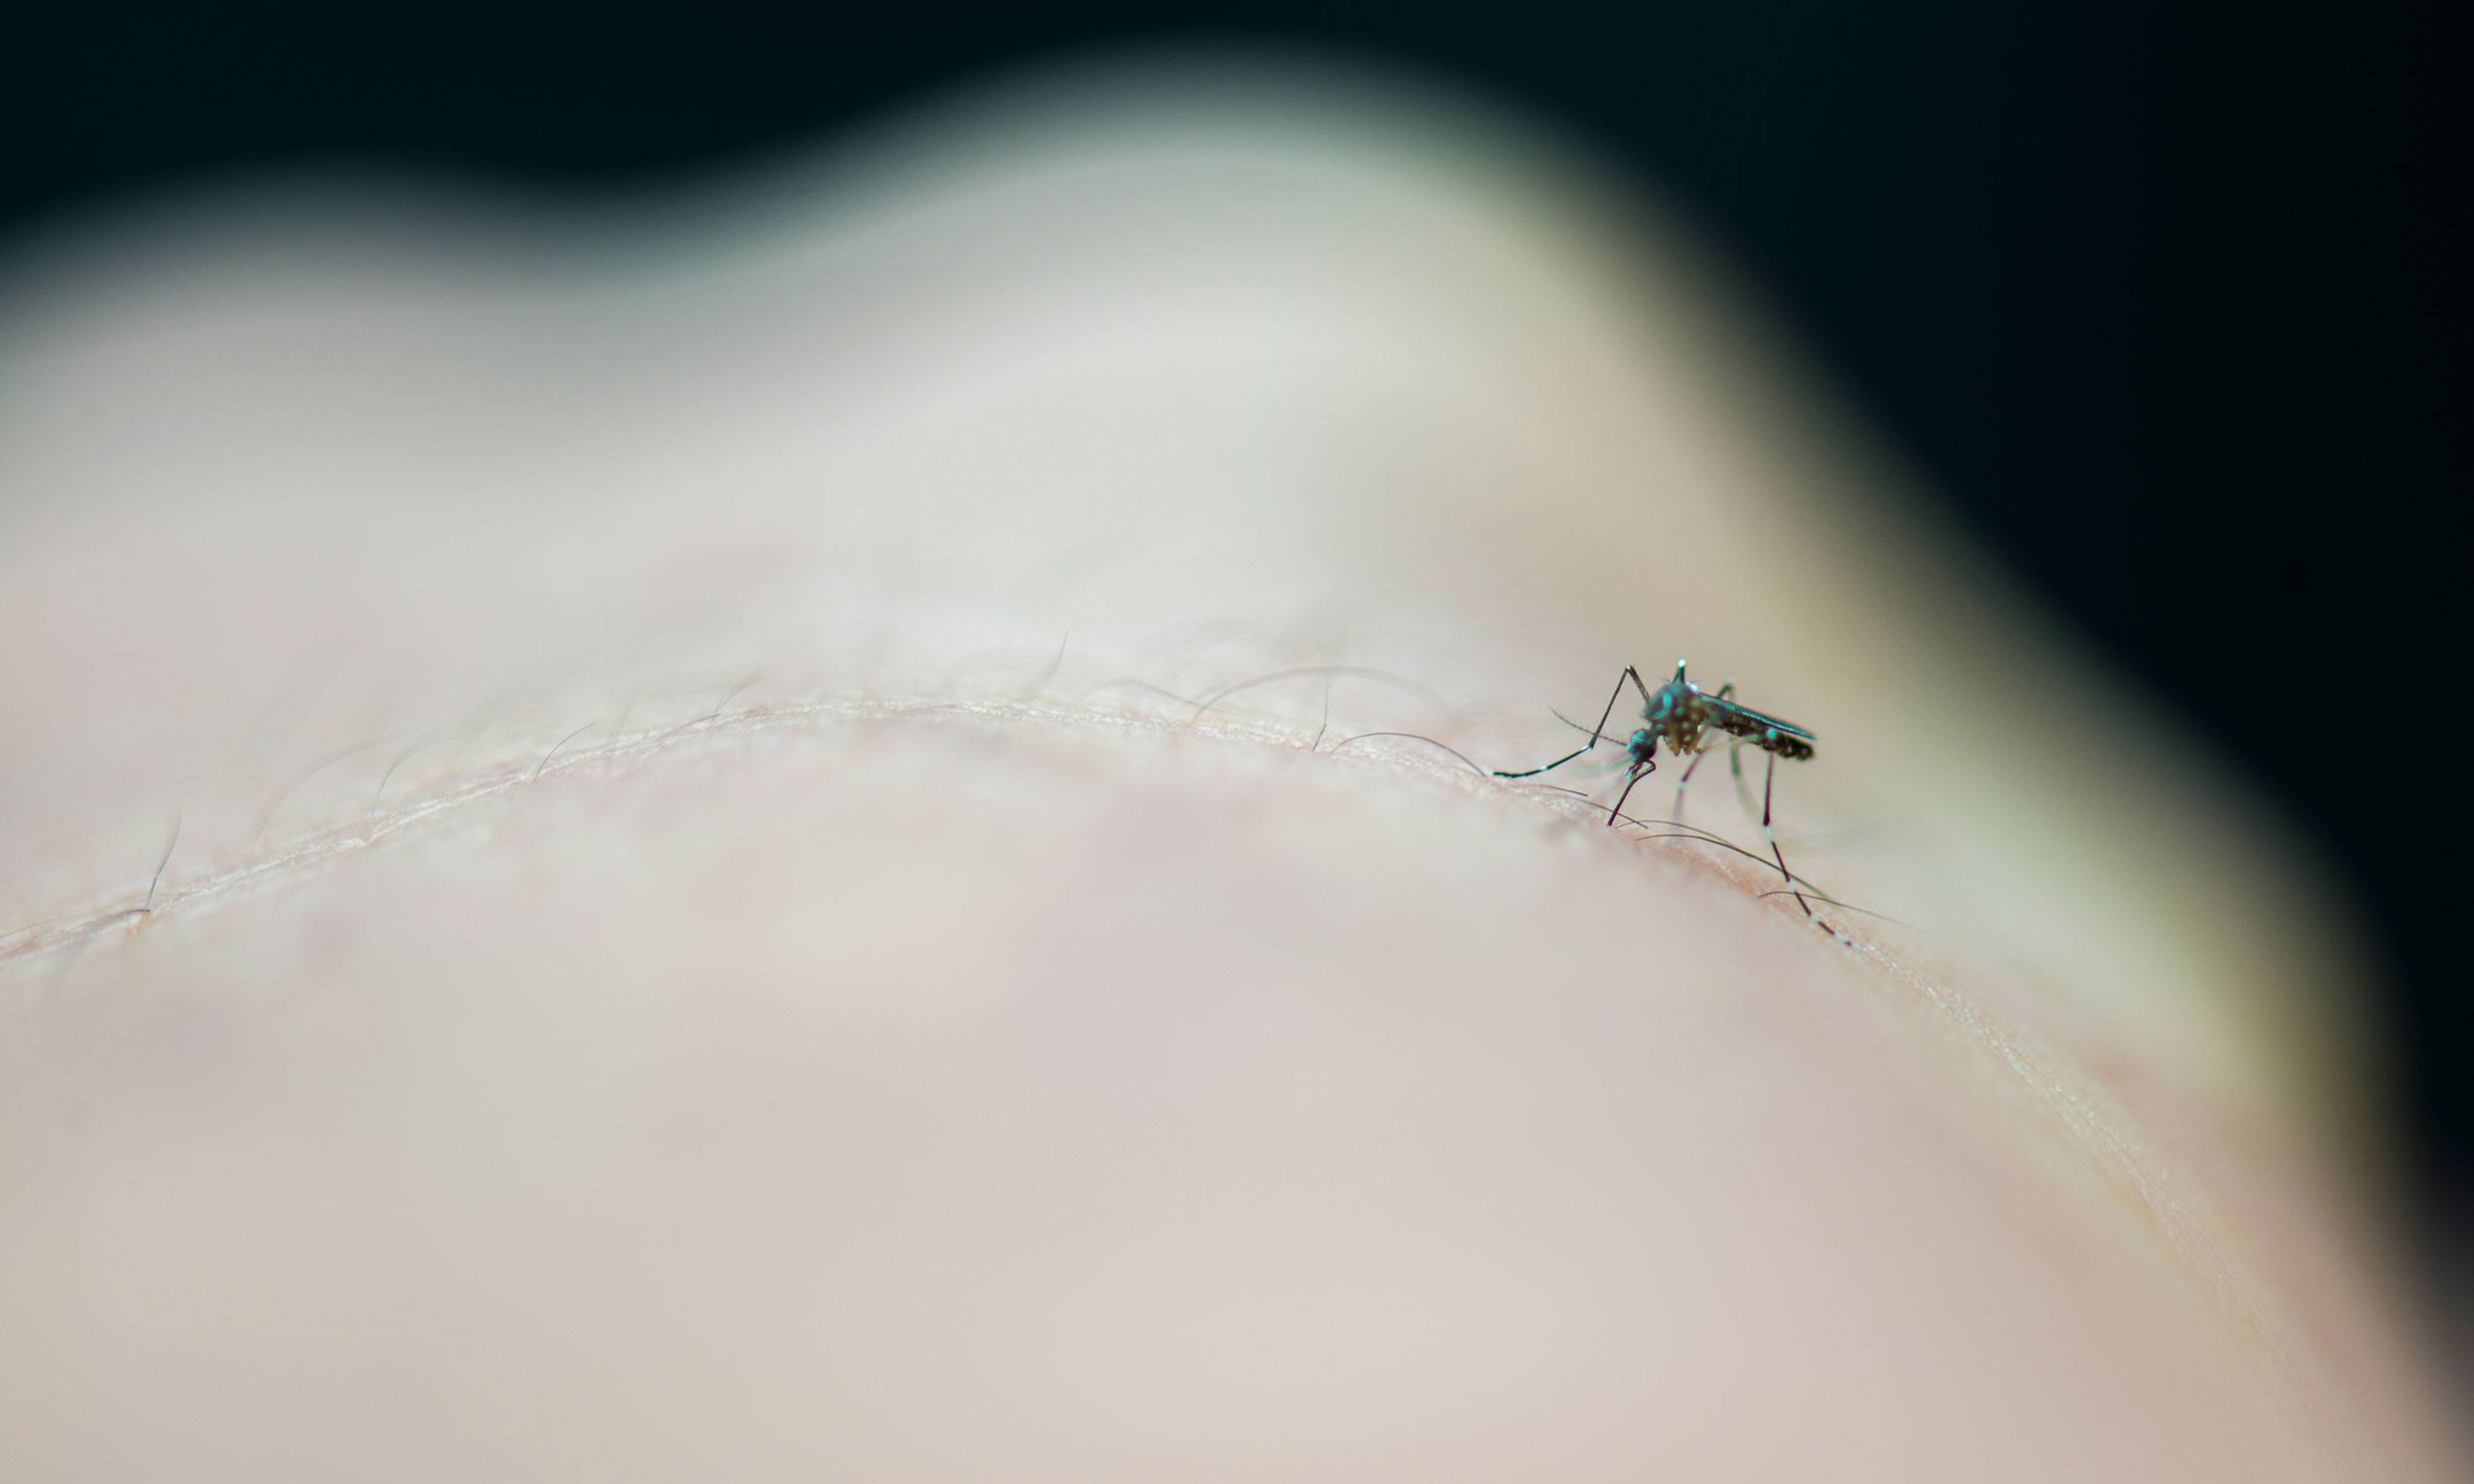 Mosquito biting a person's arm